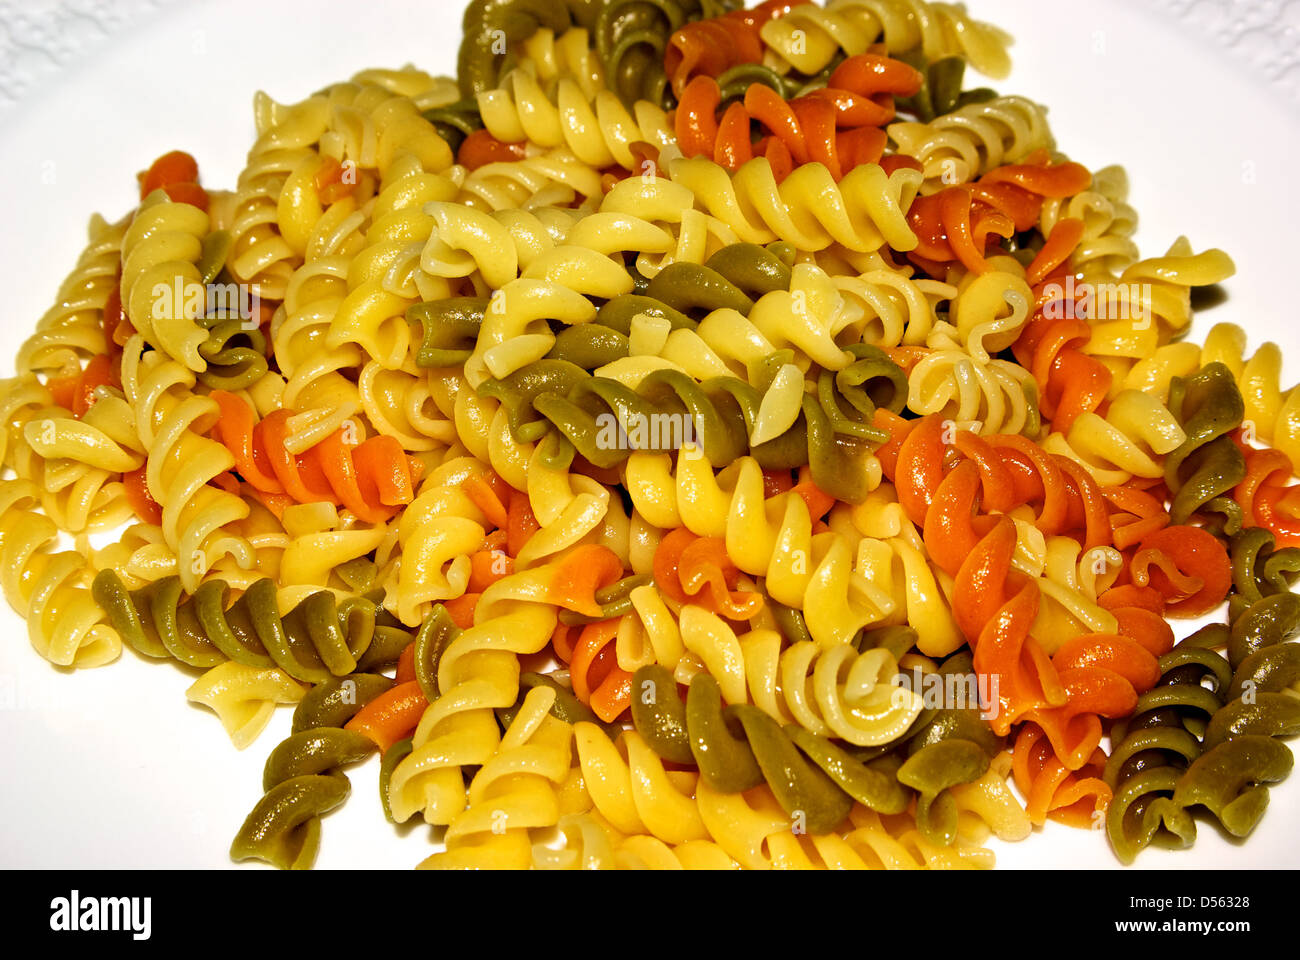 Plate steaming hot cooked tricolour pasta Stock Photo